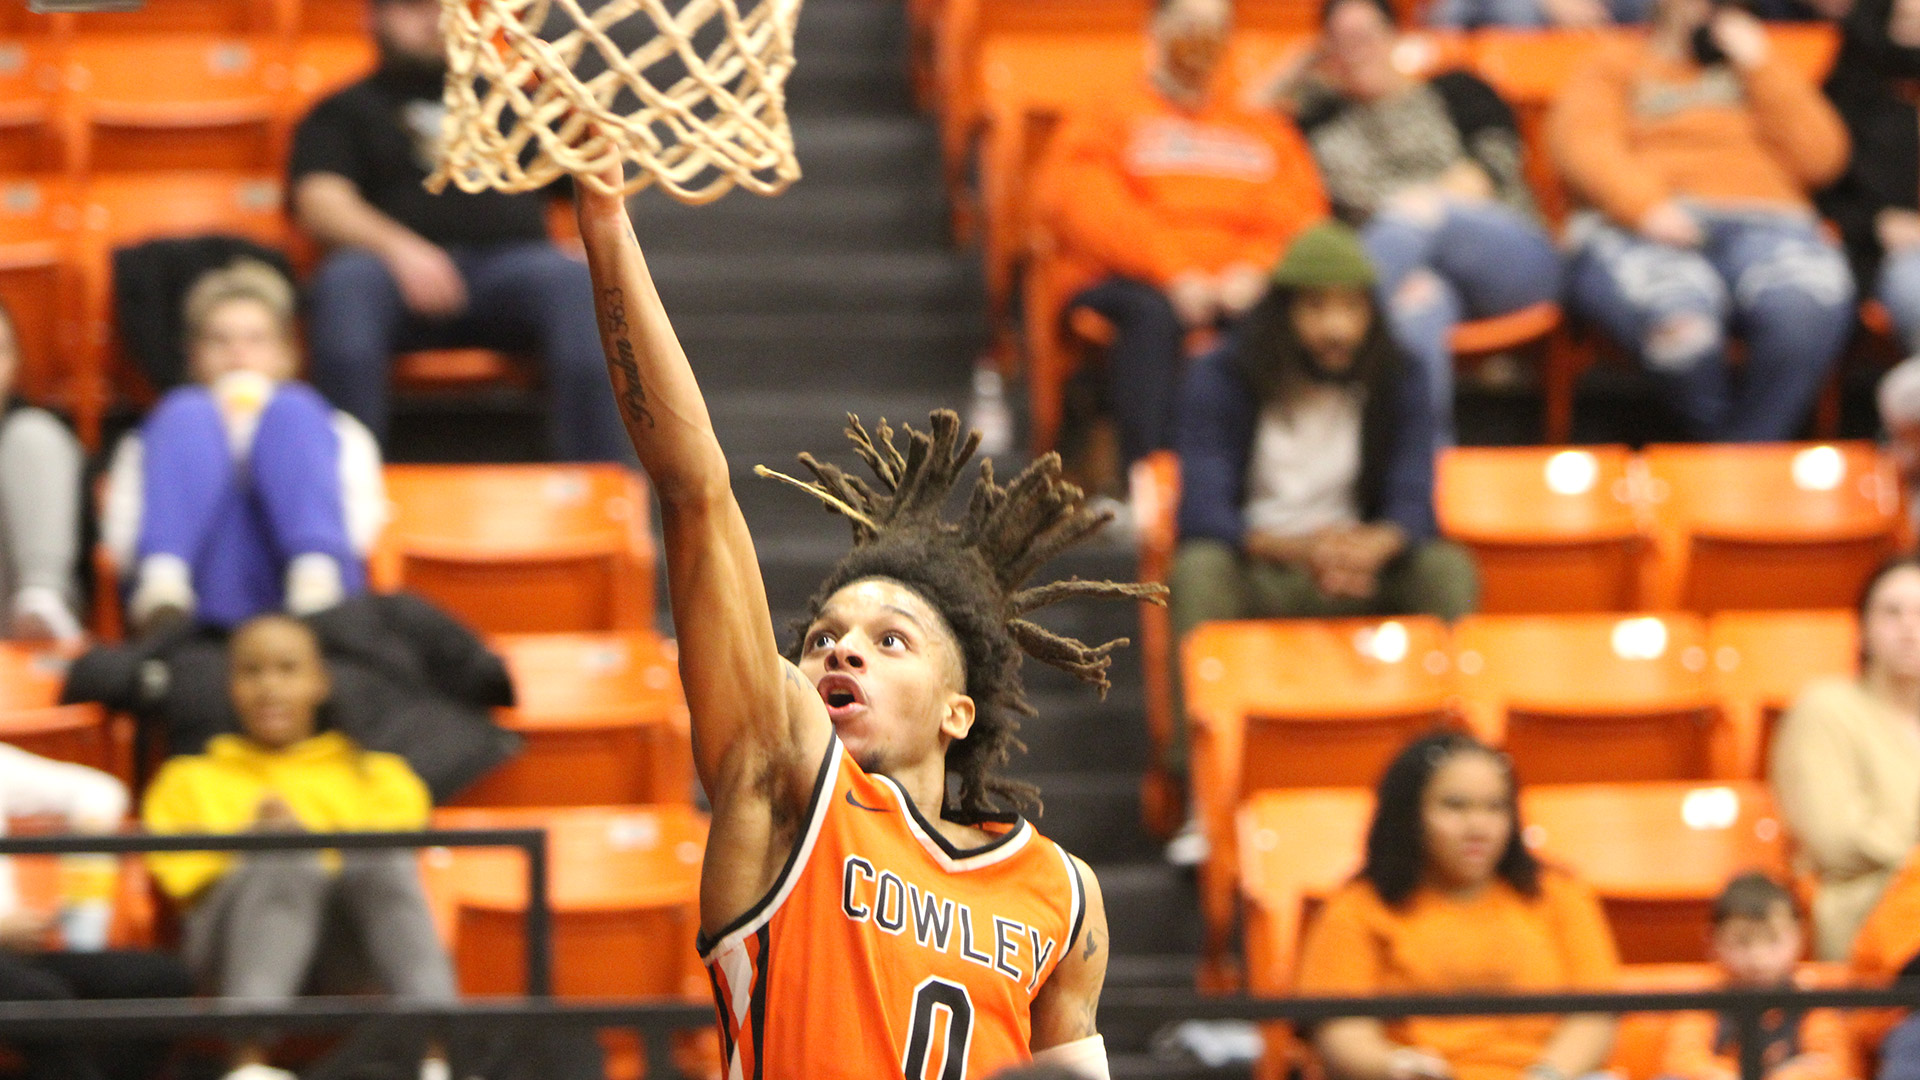 Tigers win fifth straight home game, take down No. 10-ranked Hutchinson